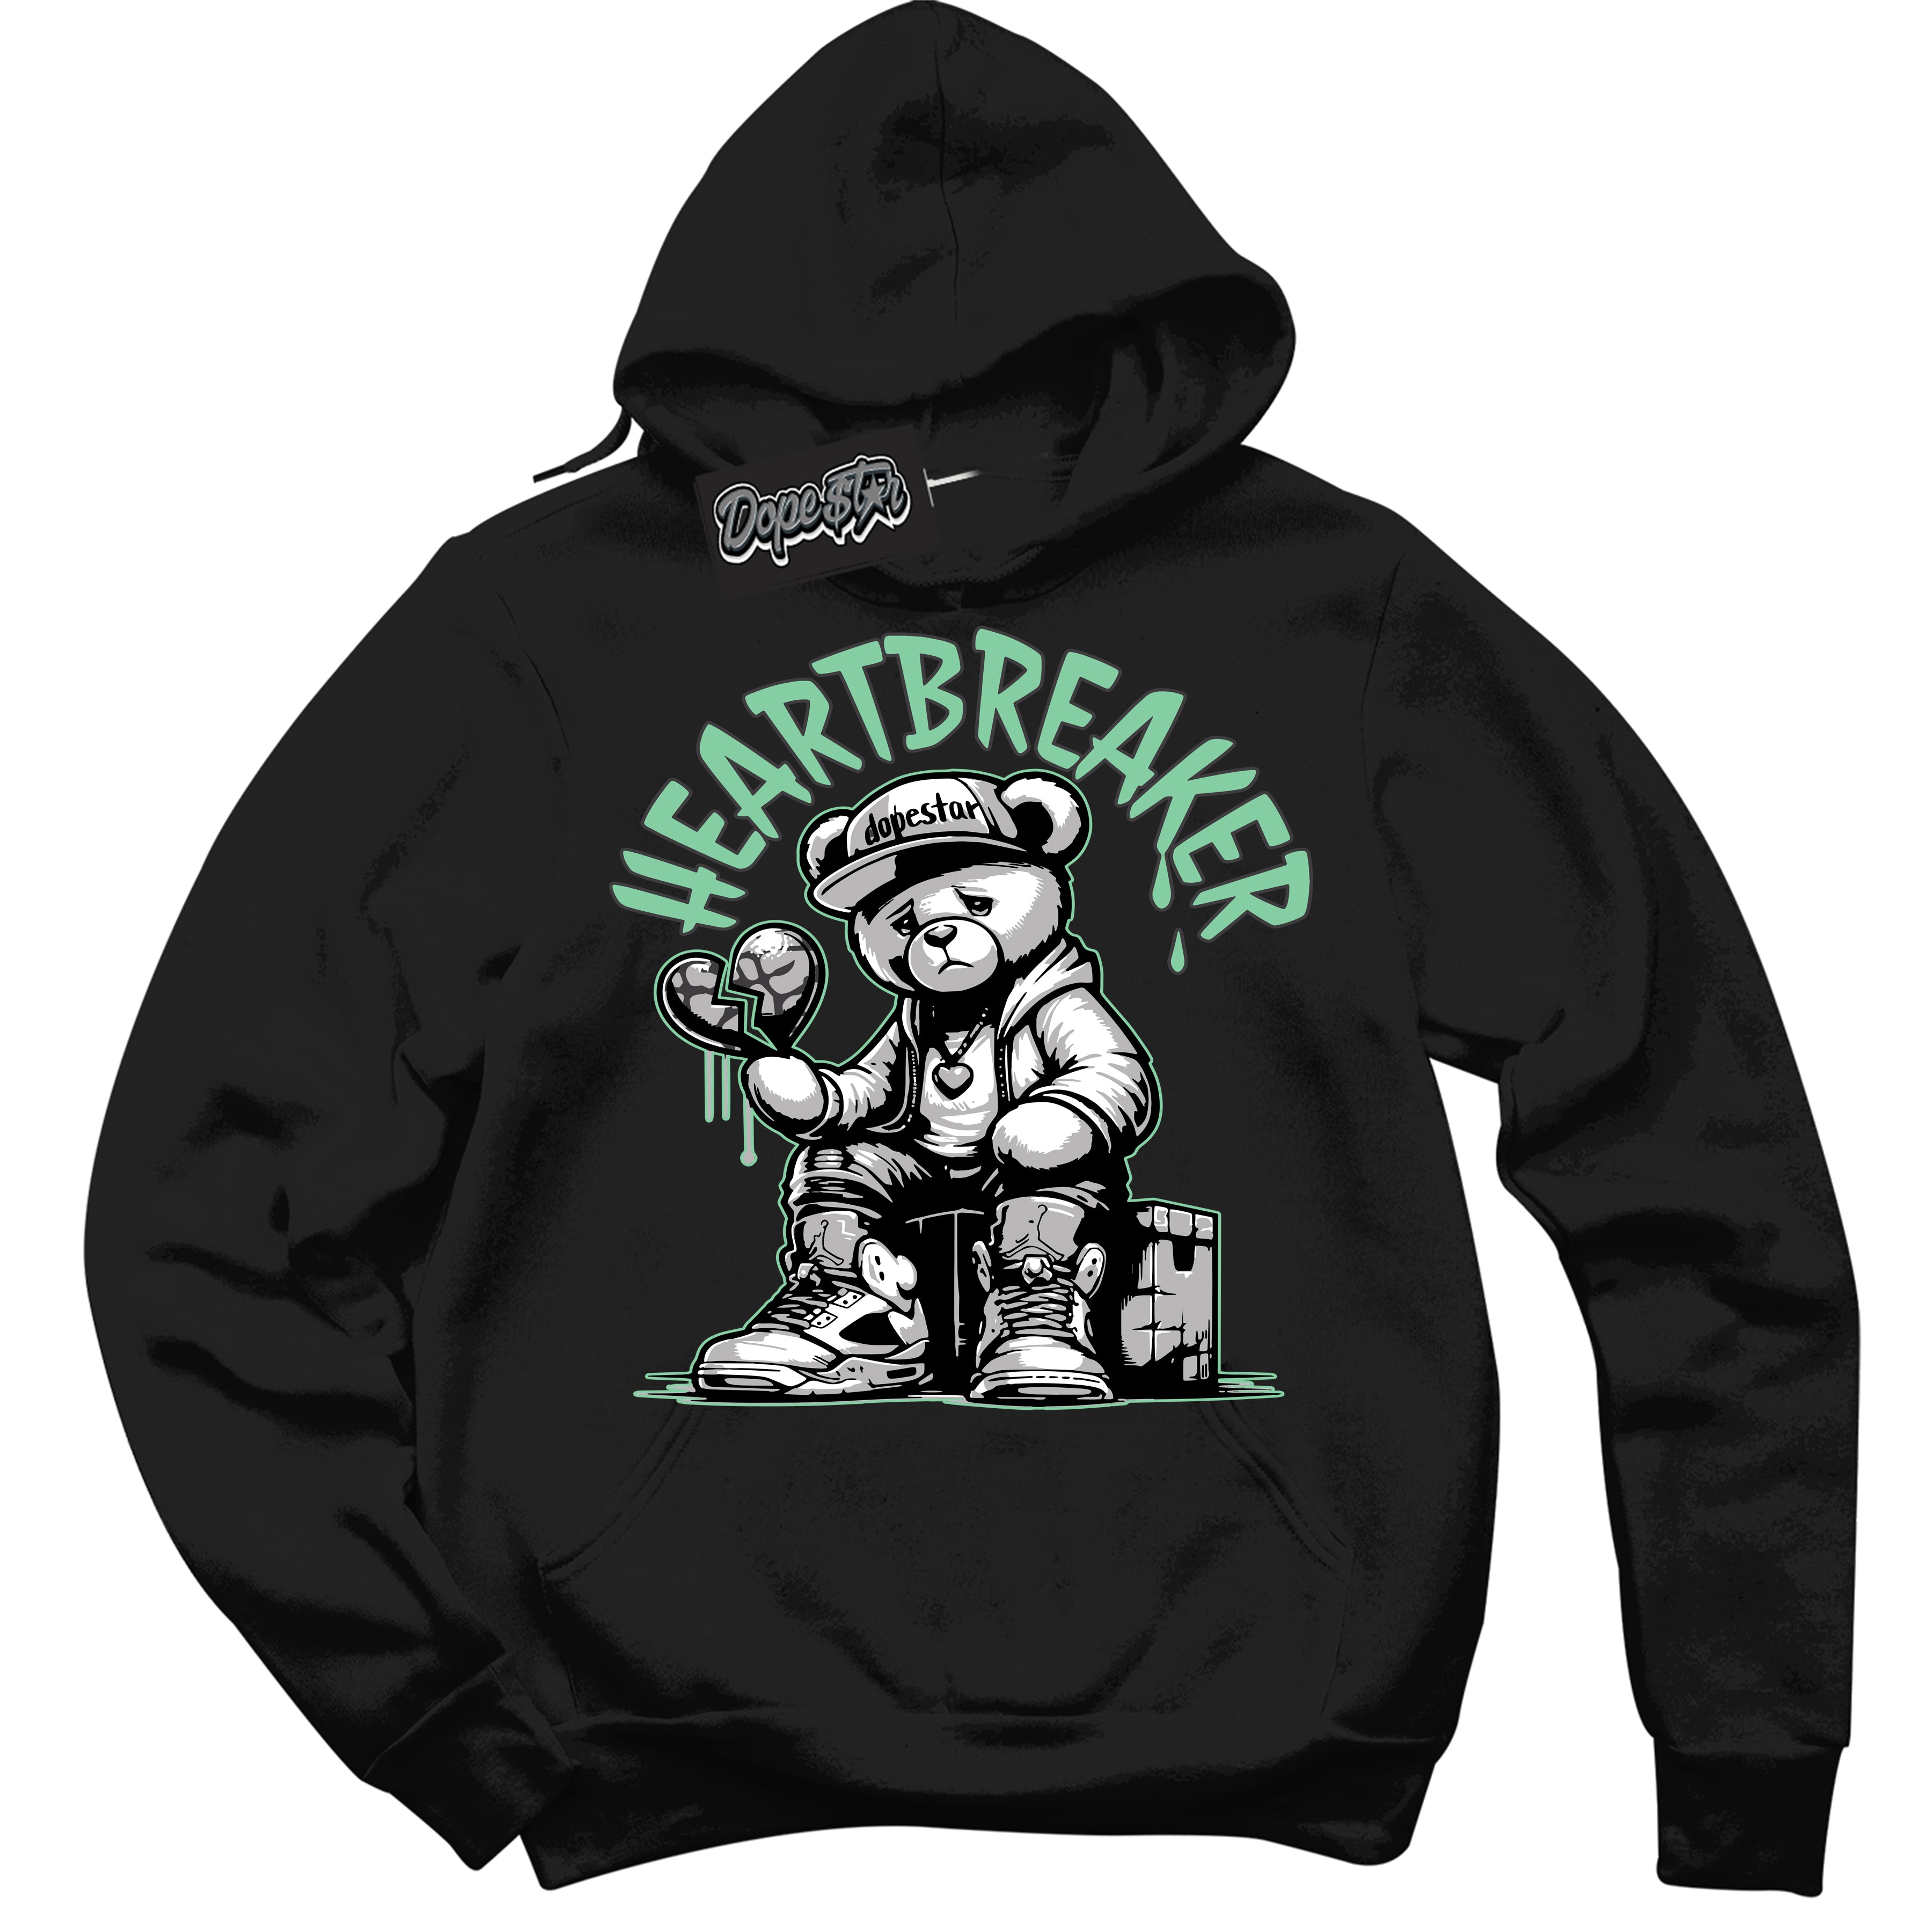 Cool Black Graphic DopeStar Hoodie with “ Heartbreaker “ print, that perfectly matches Green Glow 3S sneakers